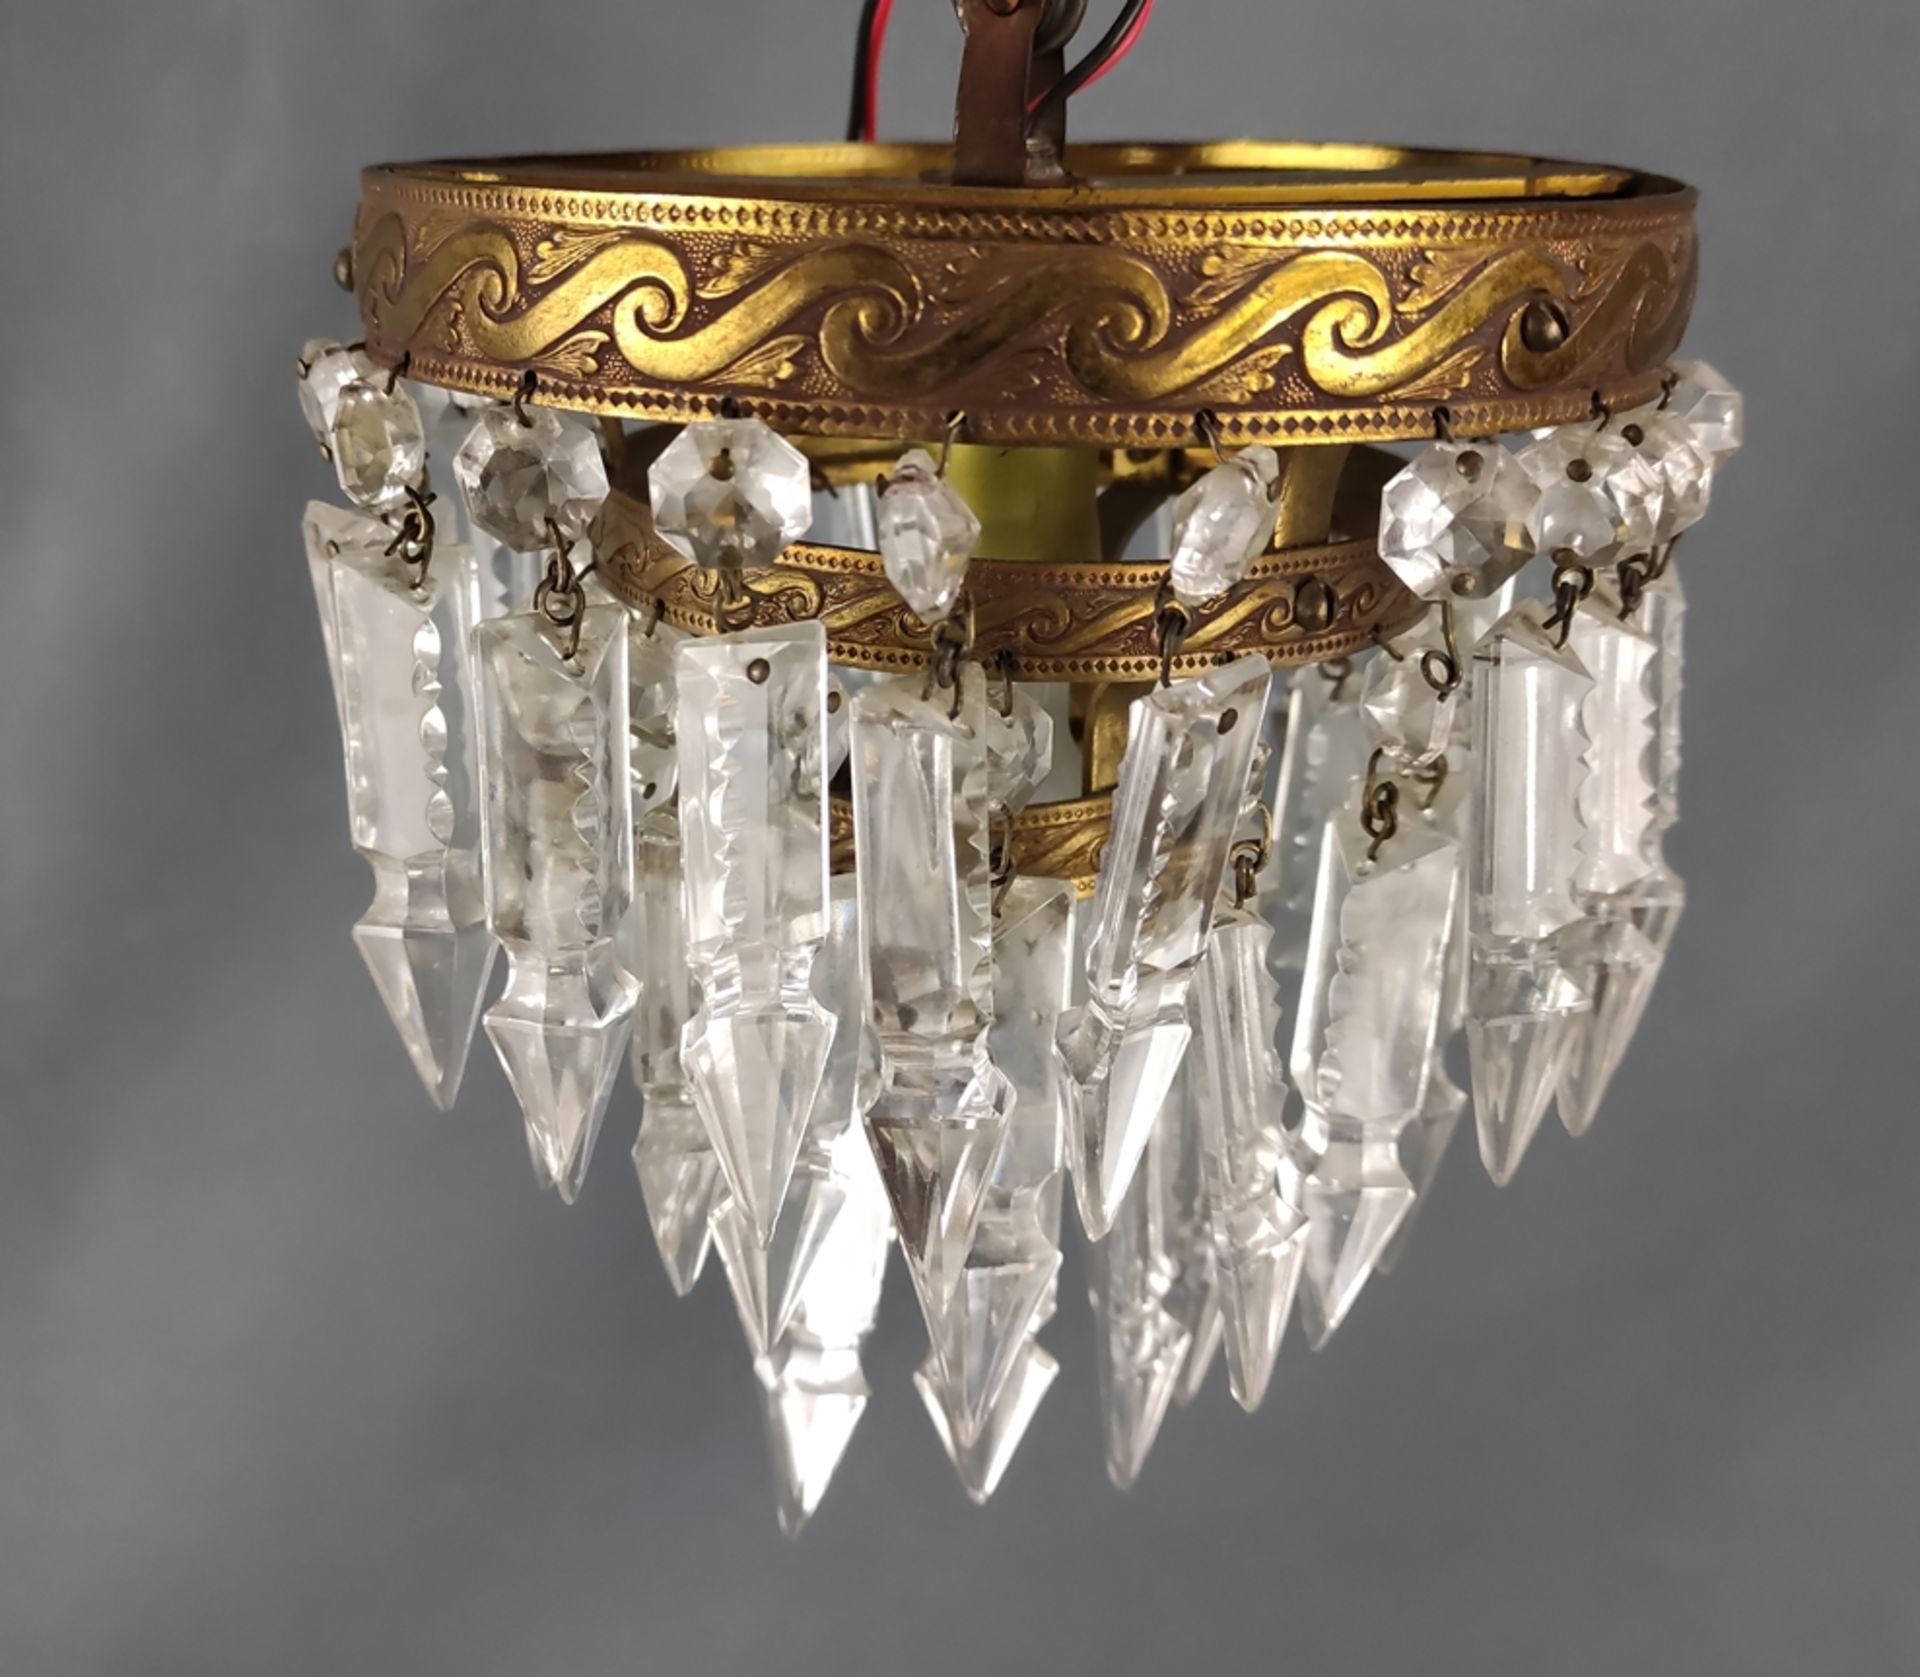 Two small ceiling chandeliers, three rows each, decorated with cut crystals, brass bands with wave  - Image 2 of 2